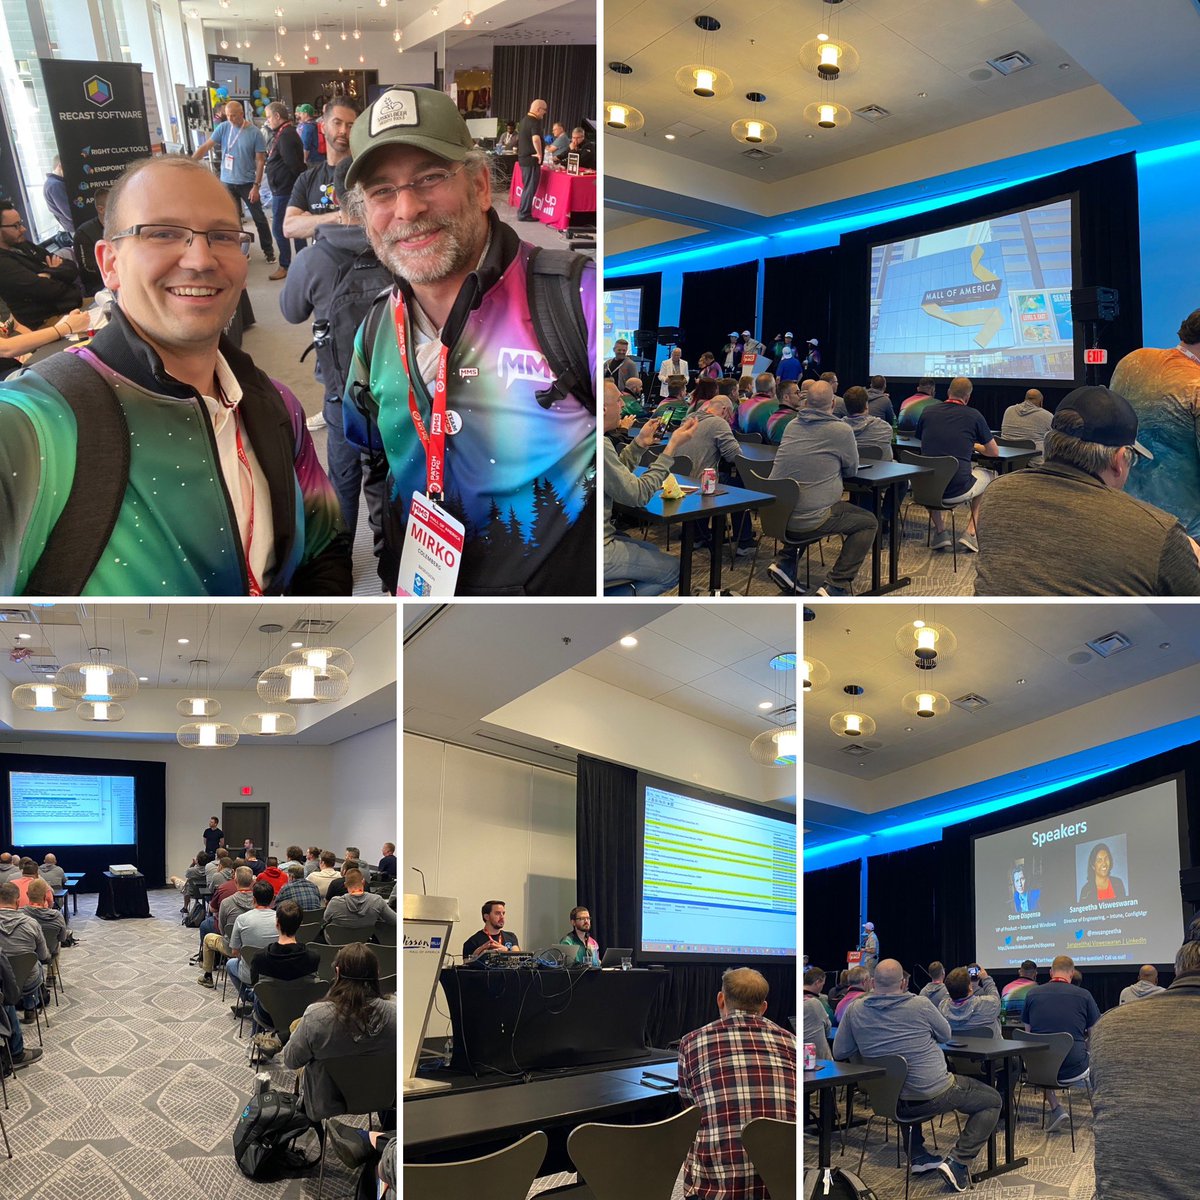 An amazing first day at #mmsmoa with a lot of great talks!

#EndpointManagement #lifelonglearning #MEMPowered #baseVISION